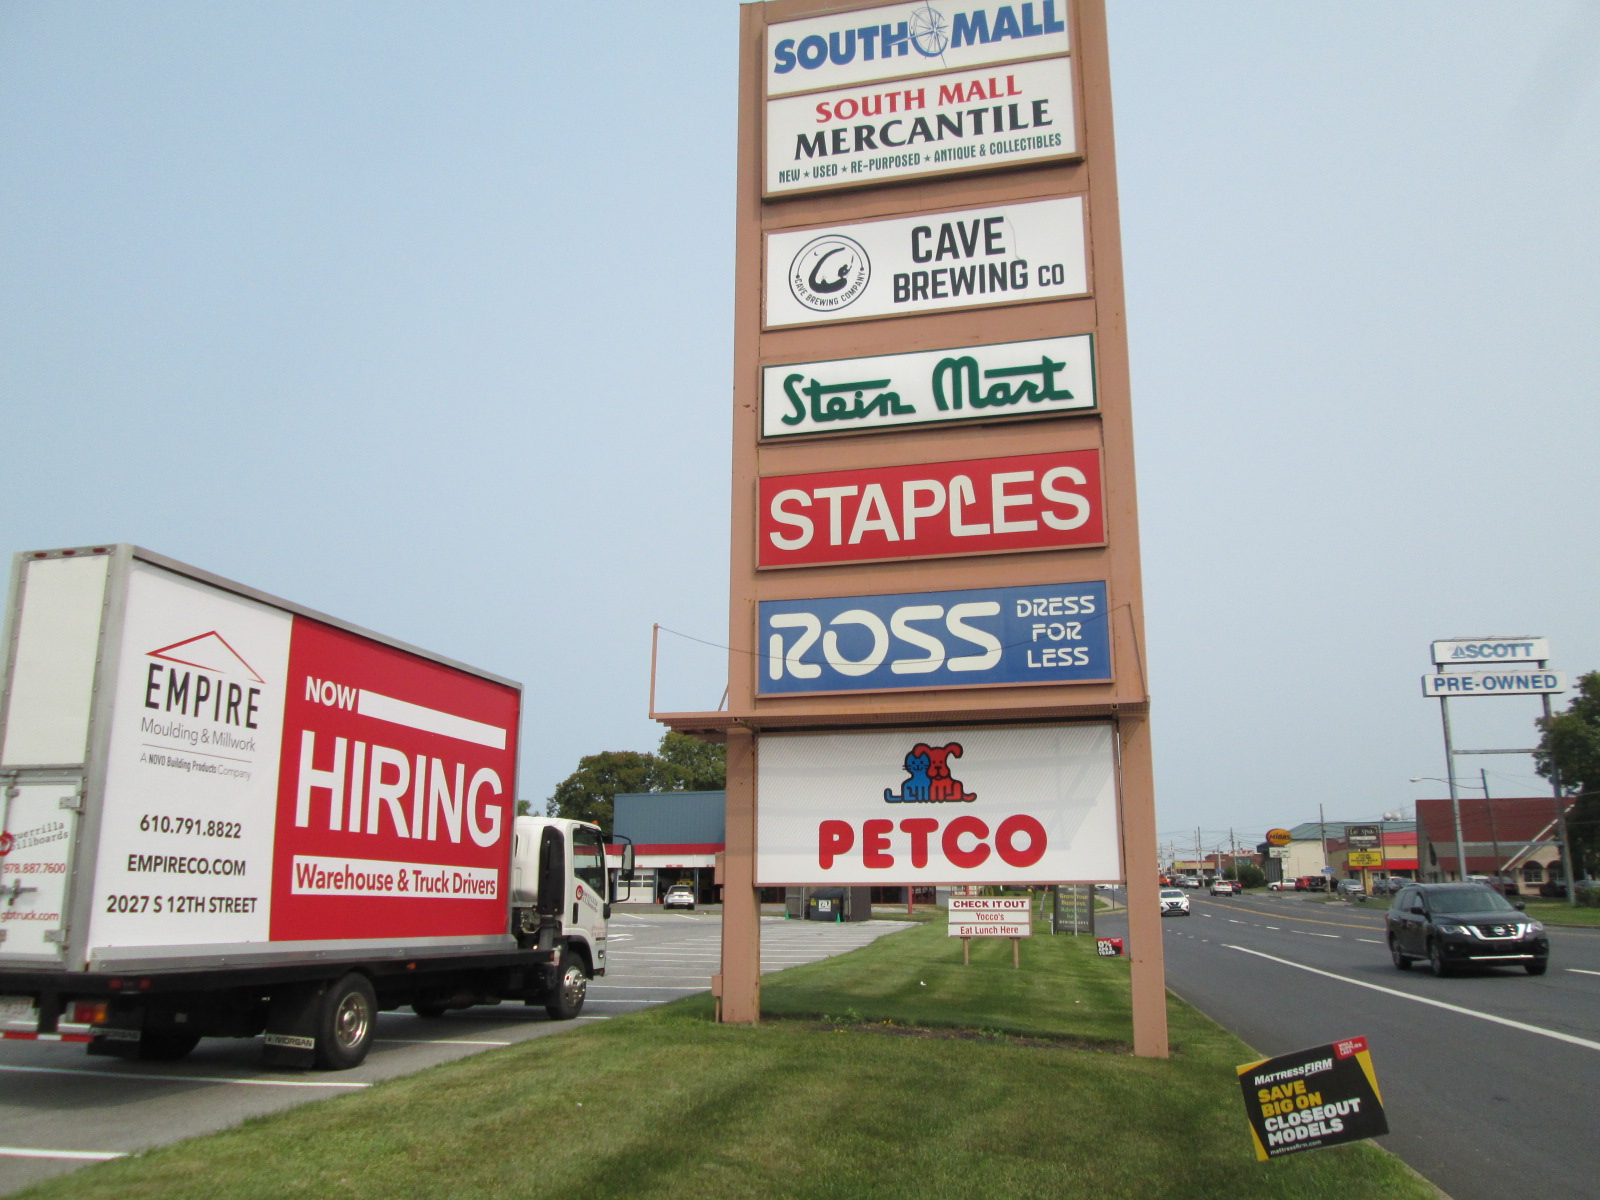 Now Hiring mobile billboard ad in Allentown PA